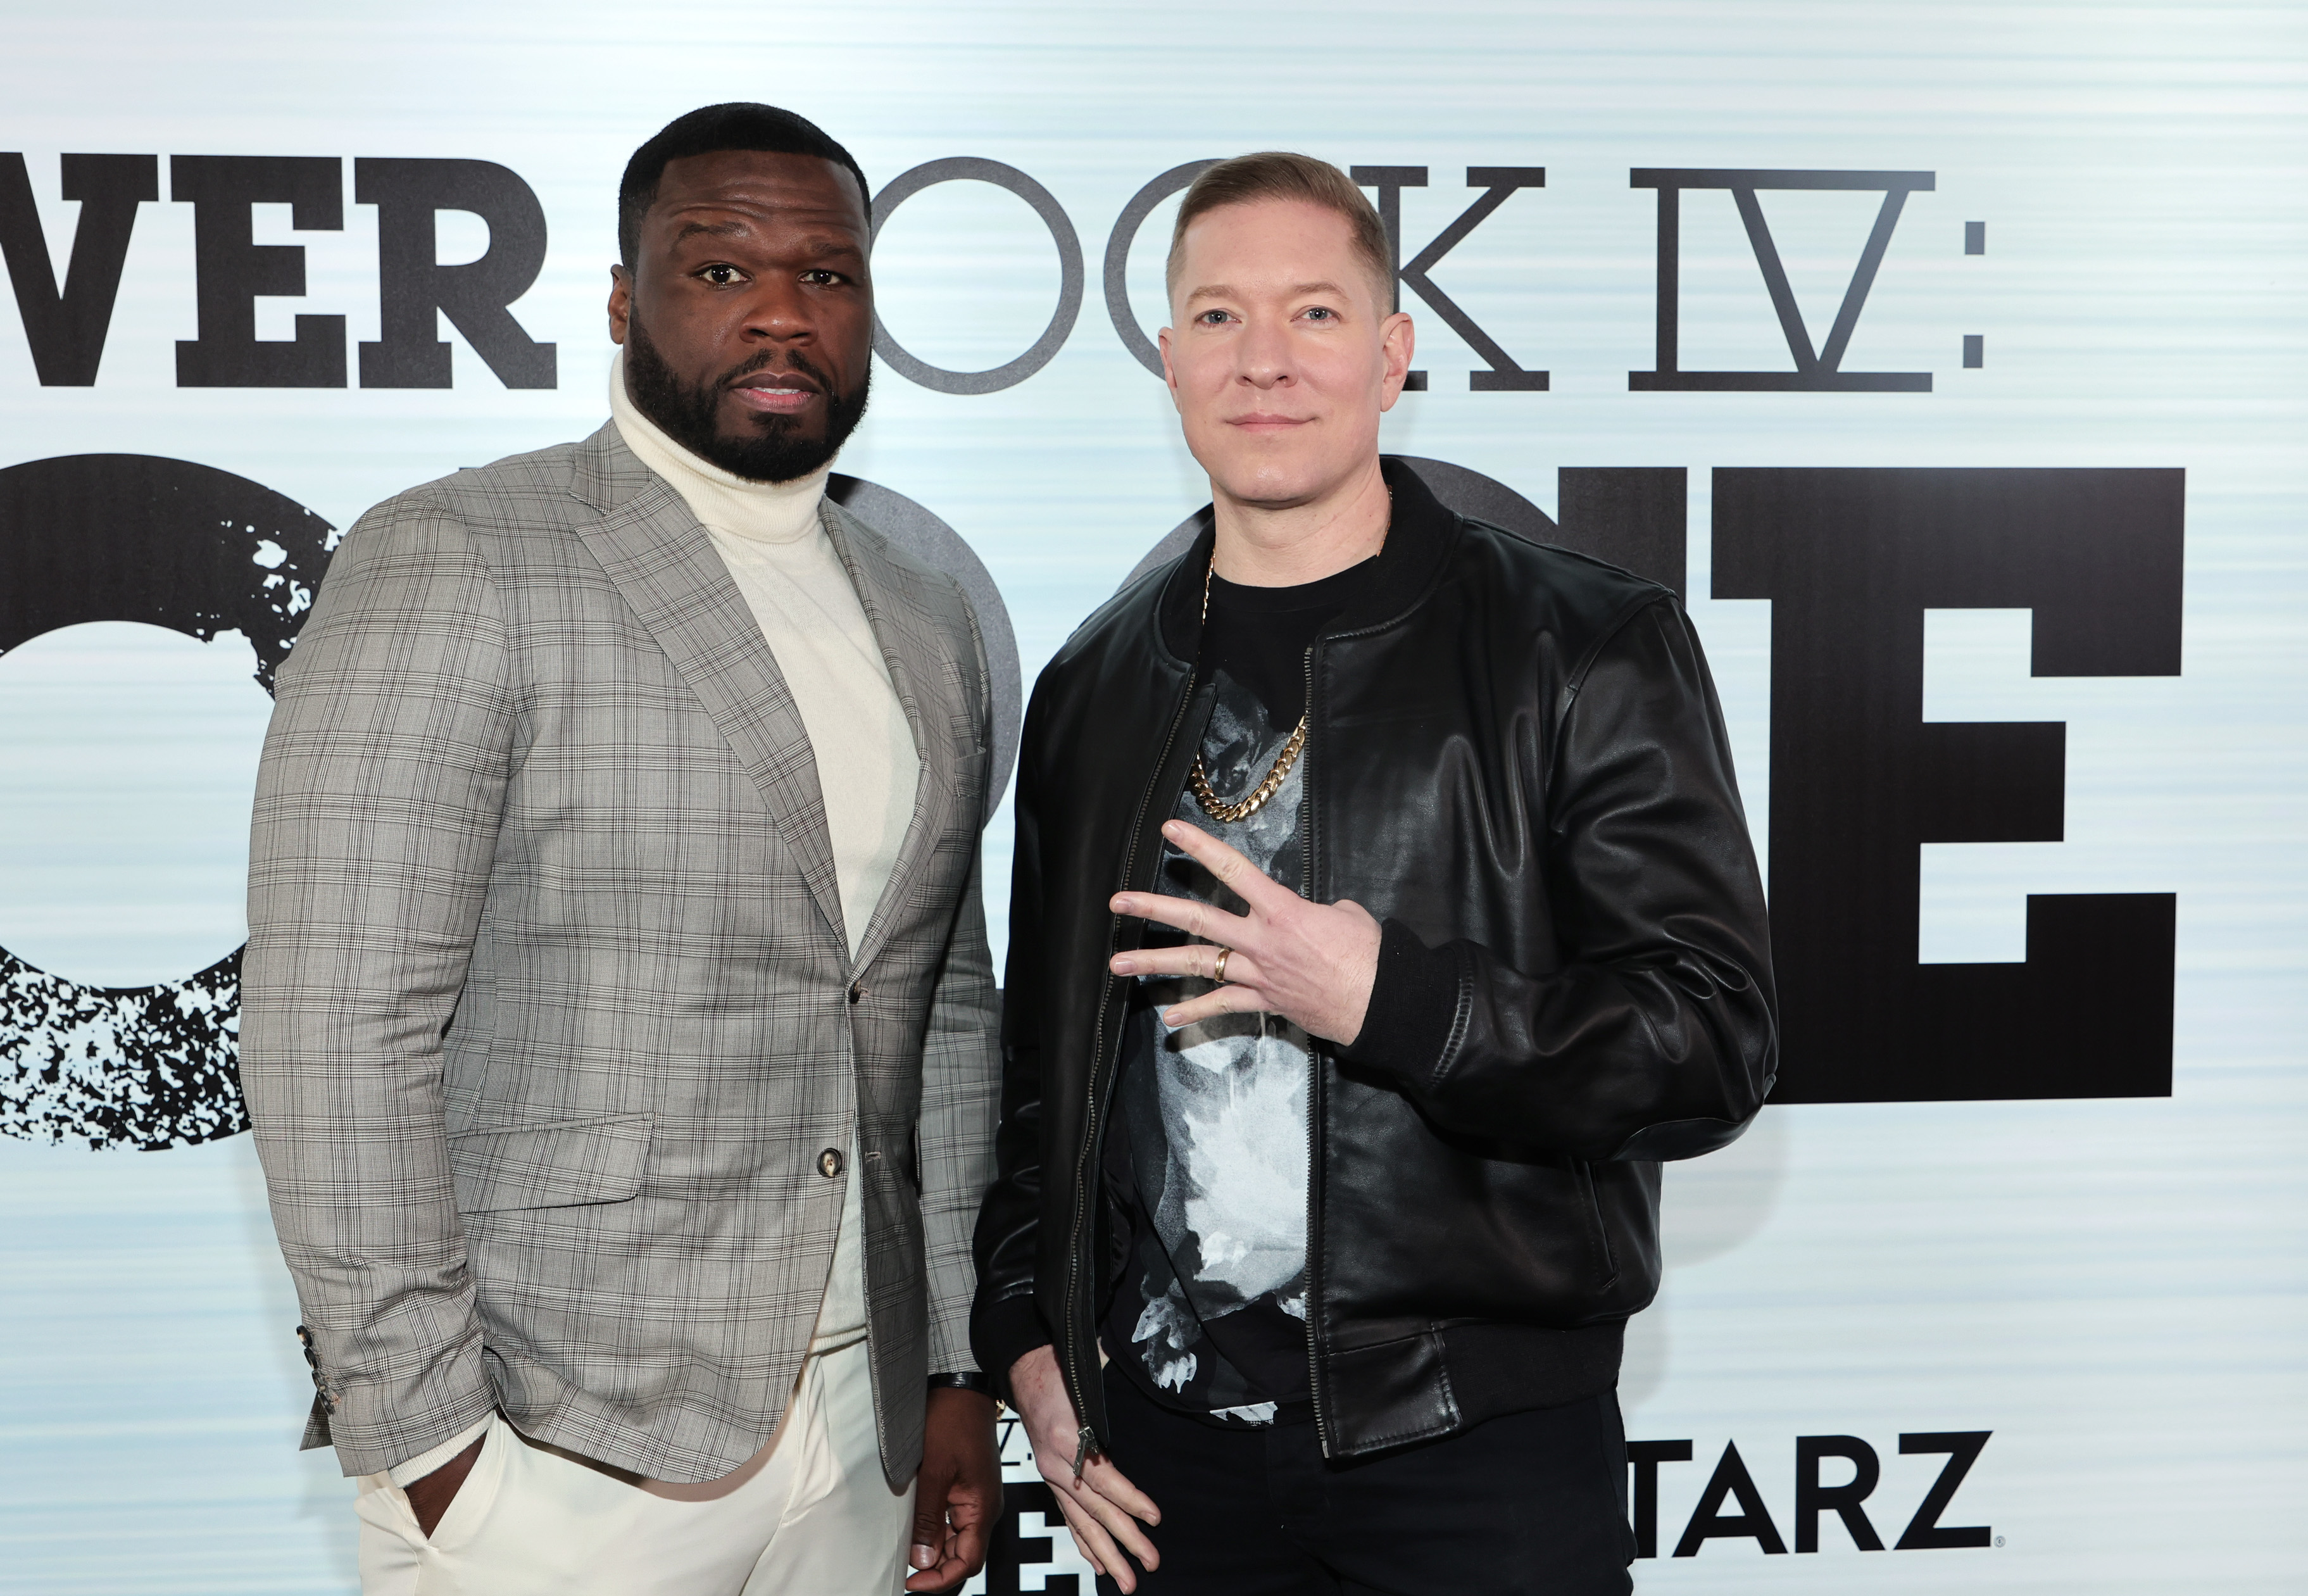 Power's 50 Cent Threatens To Quit Working With Starz, 'Packing My Stuff